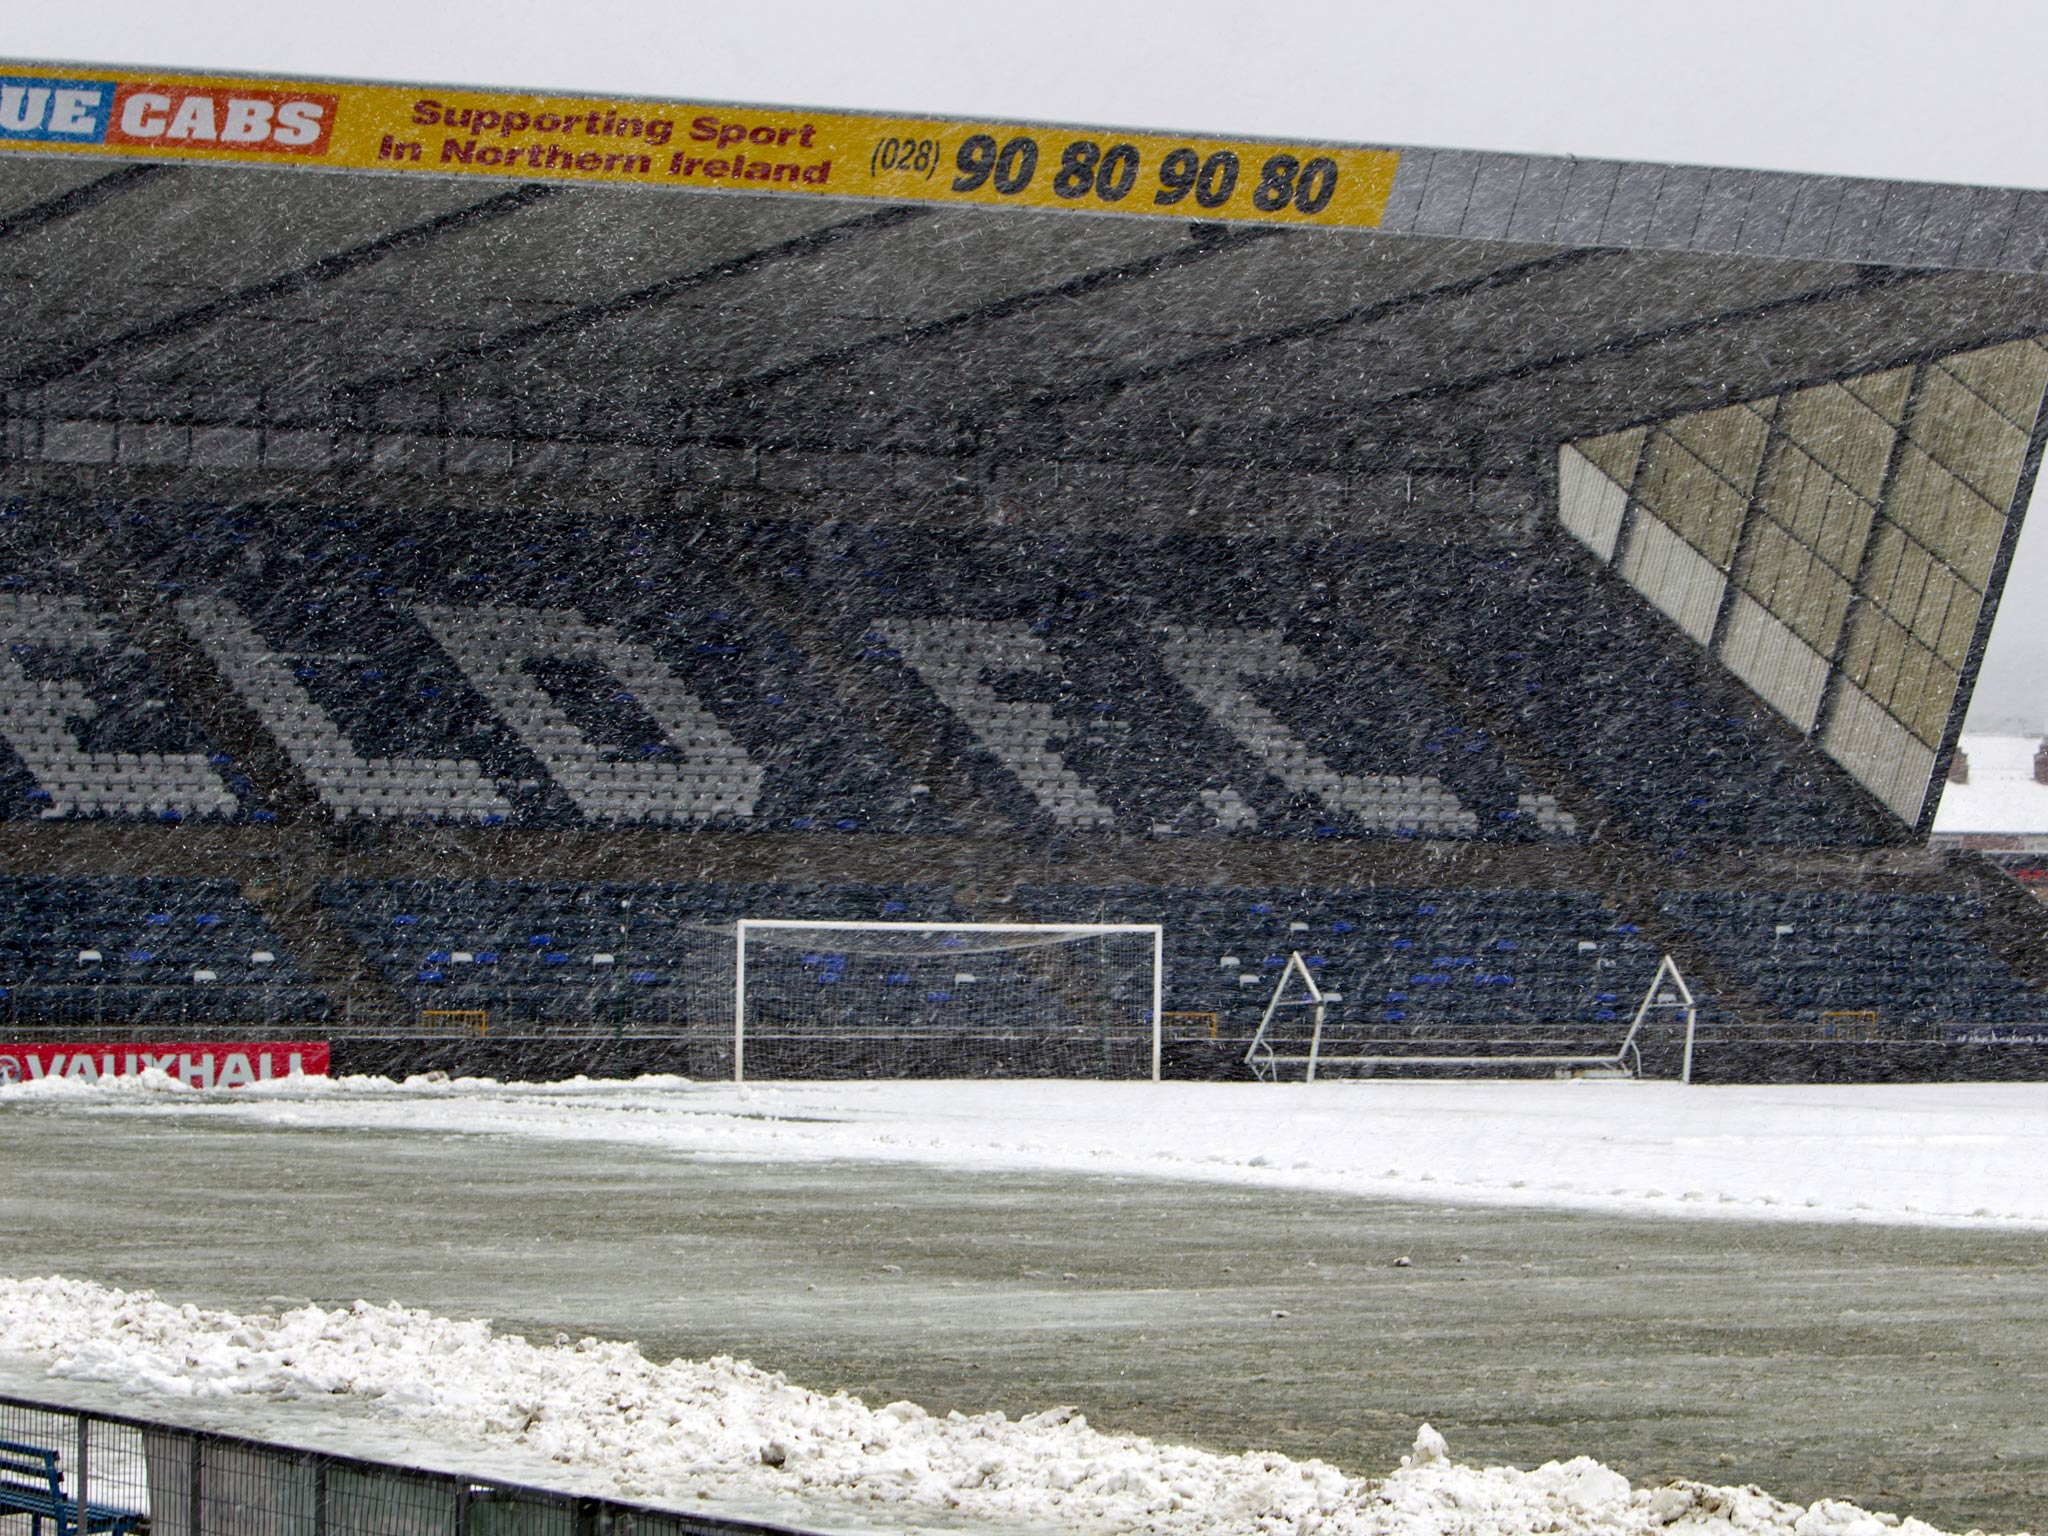 A view of the conditions at Windsor Park